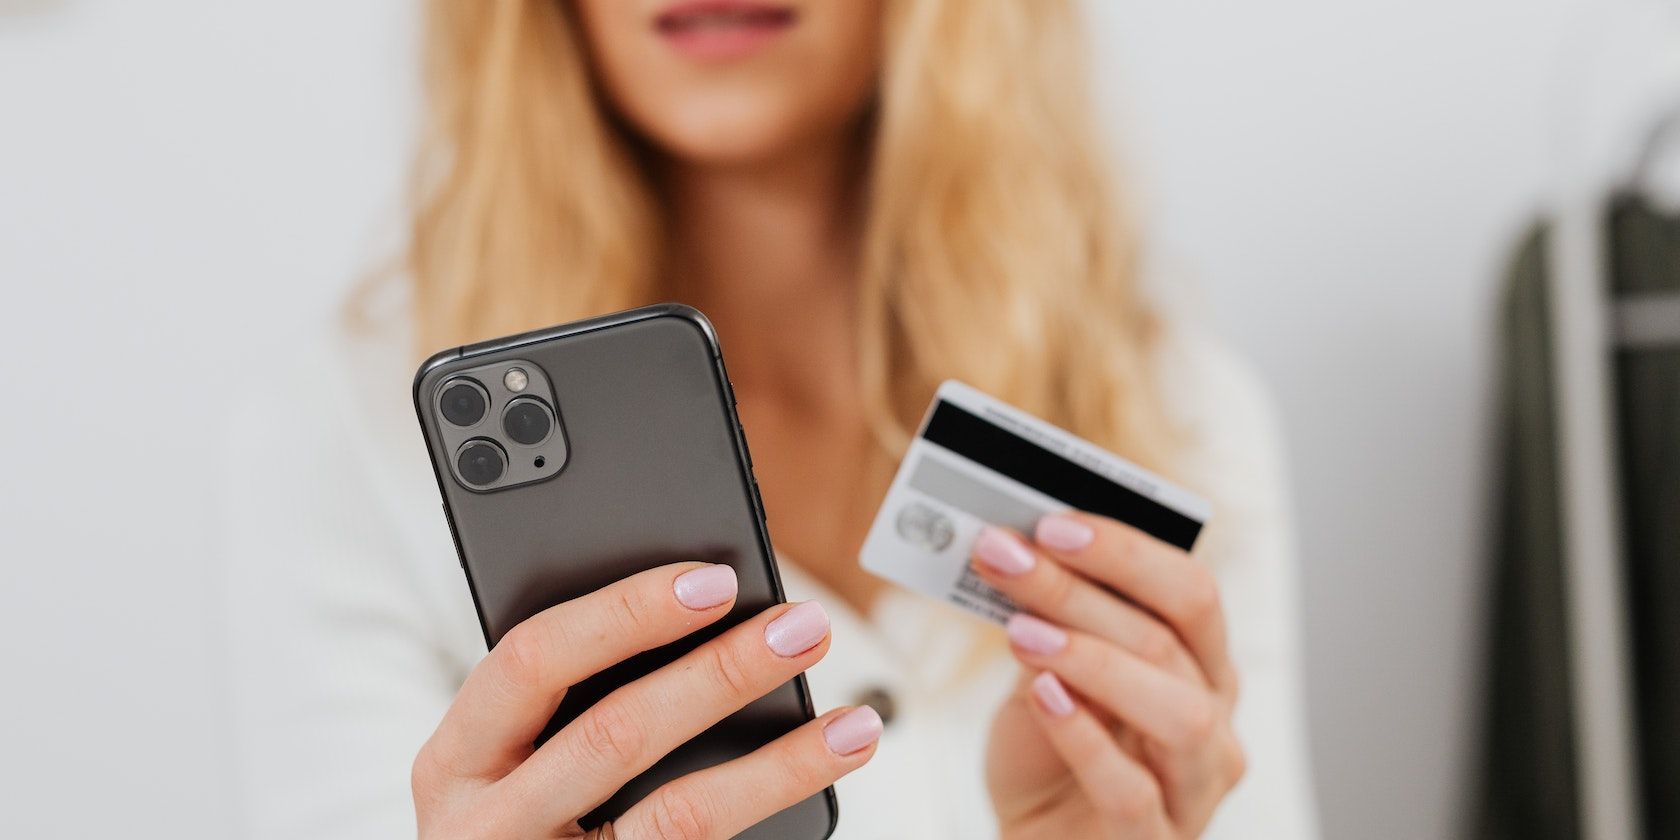 Close up shot of a woman holding an iPhone and a card